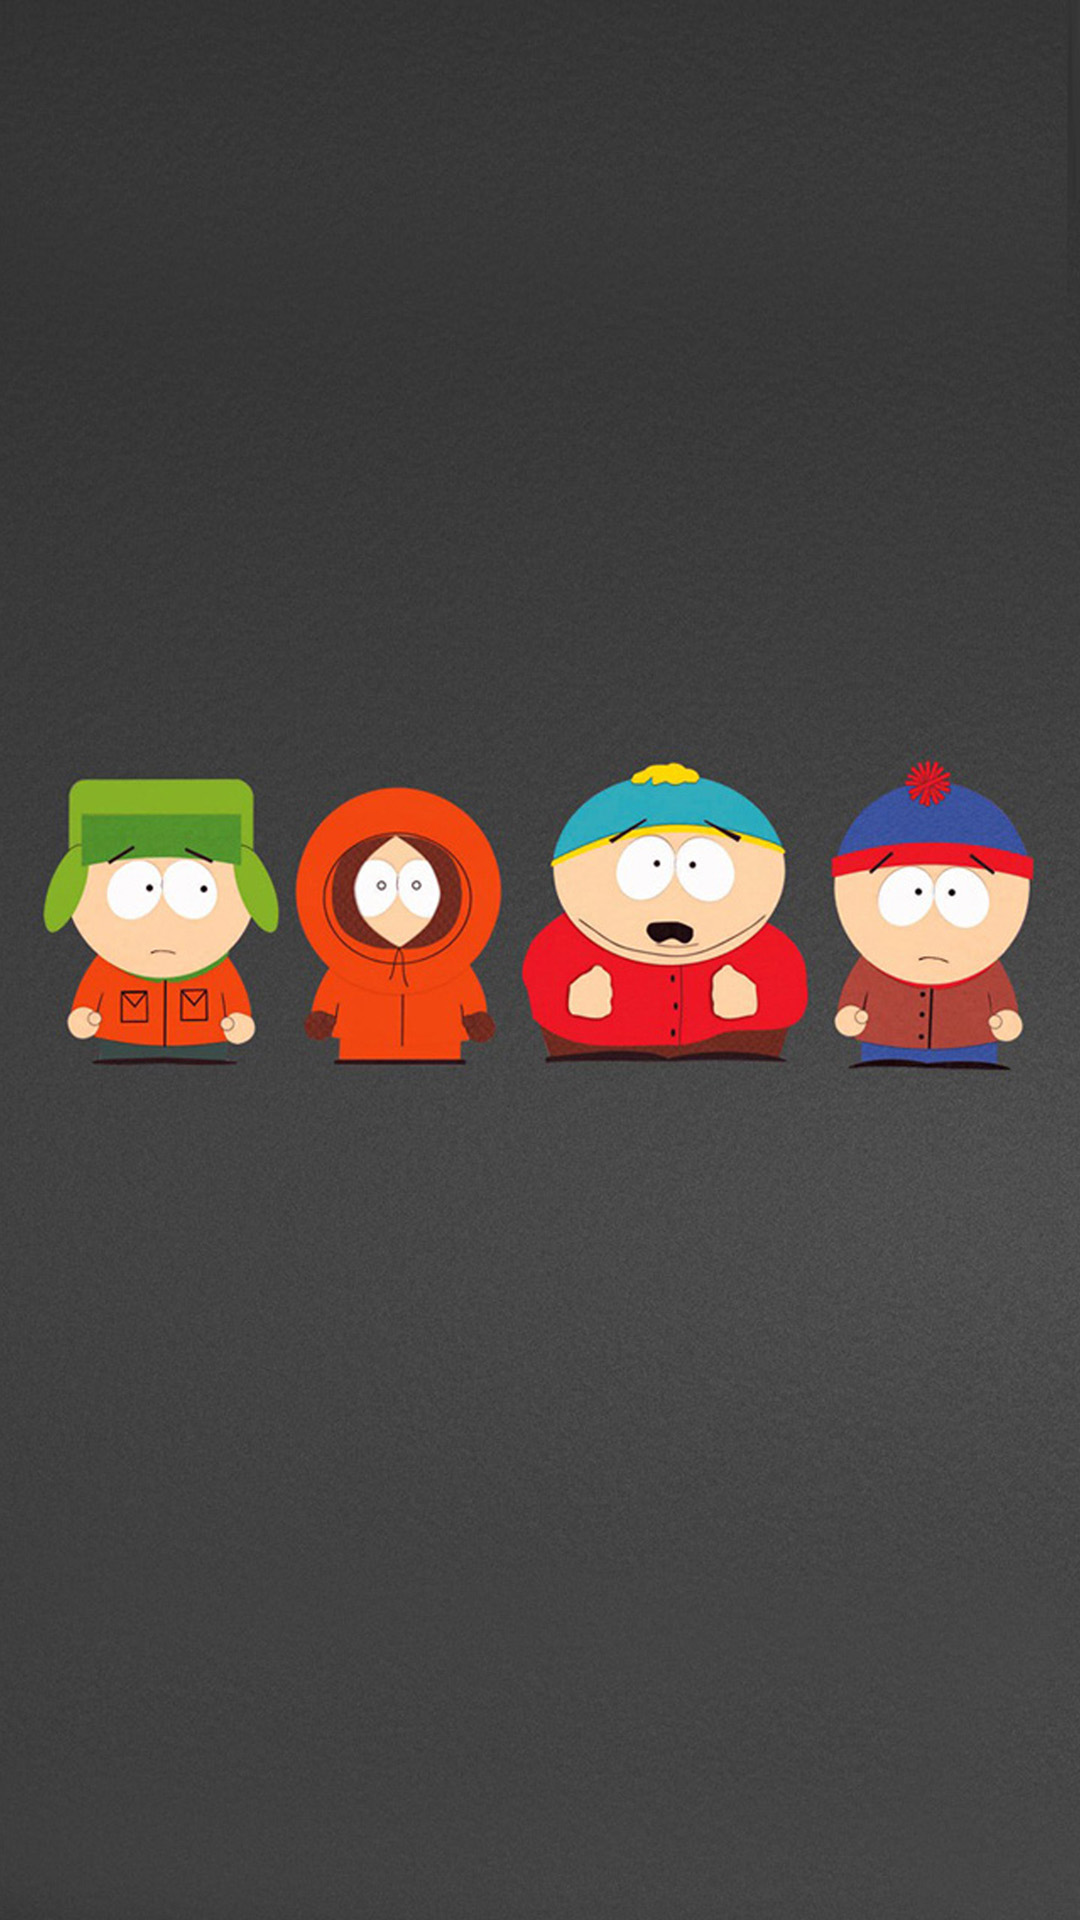 Funny South Park Wallpaper Image